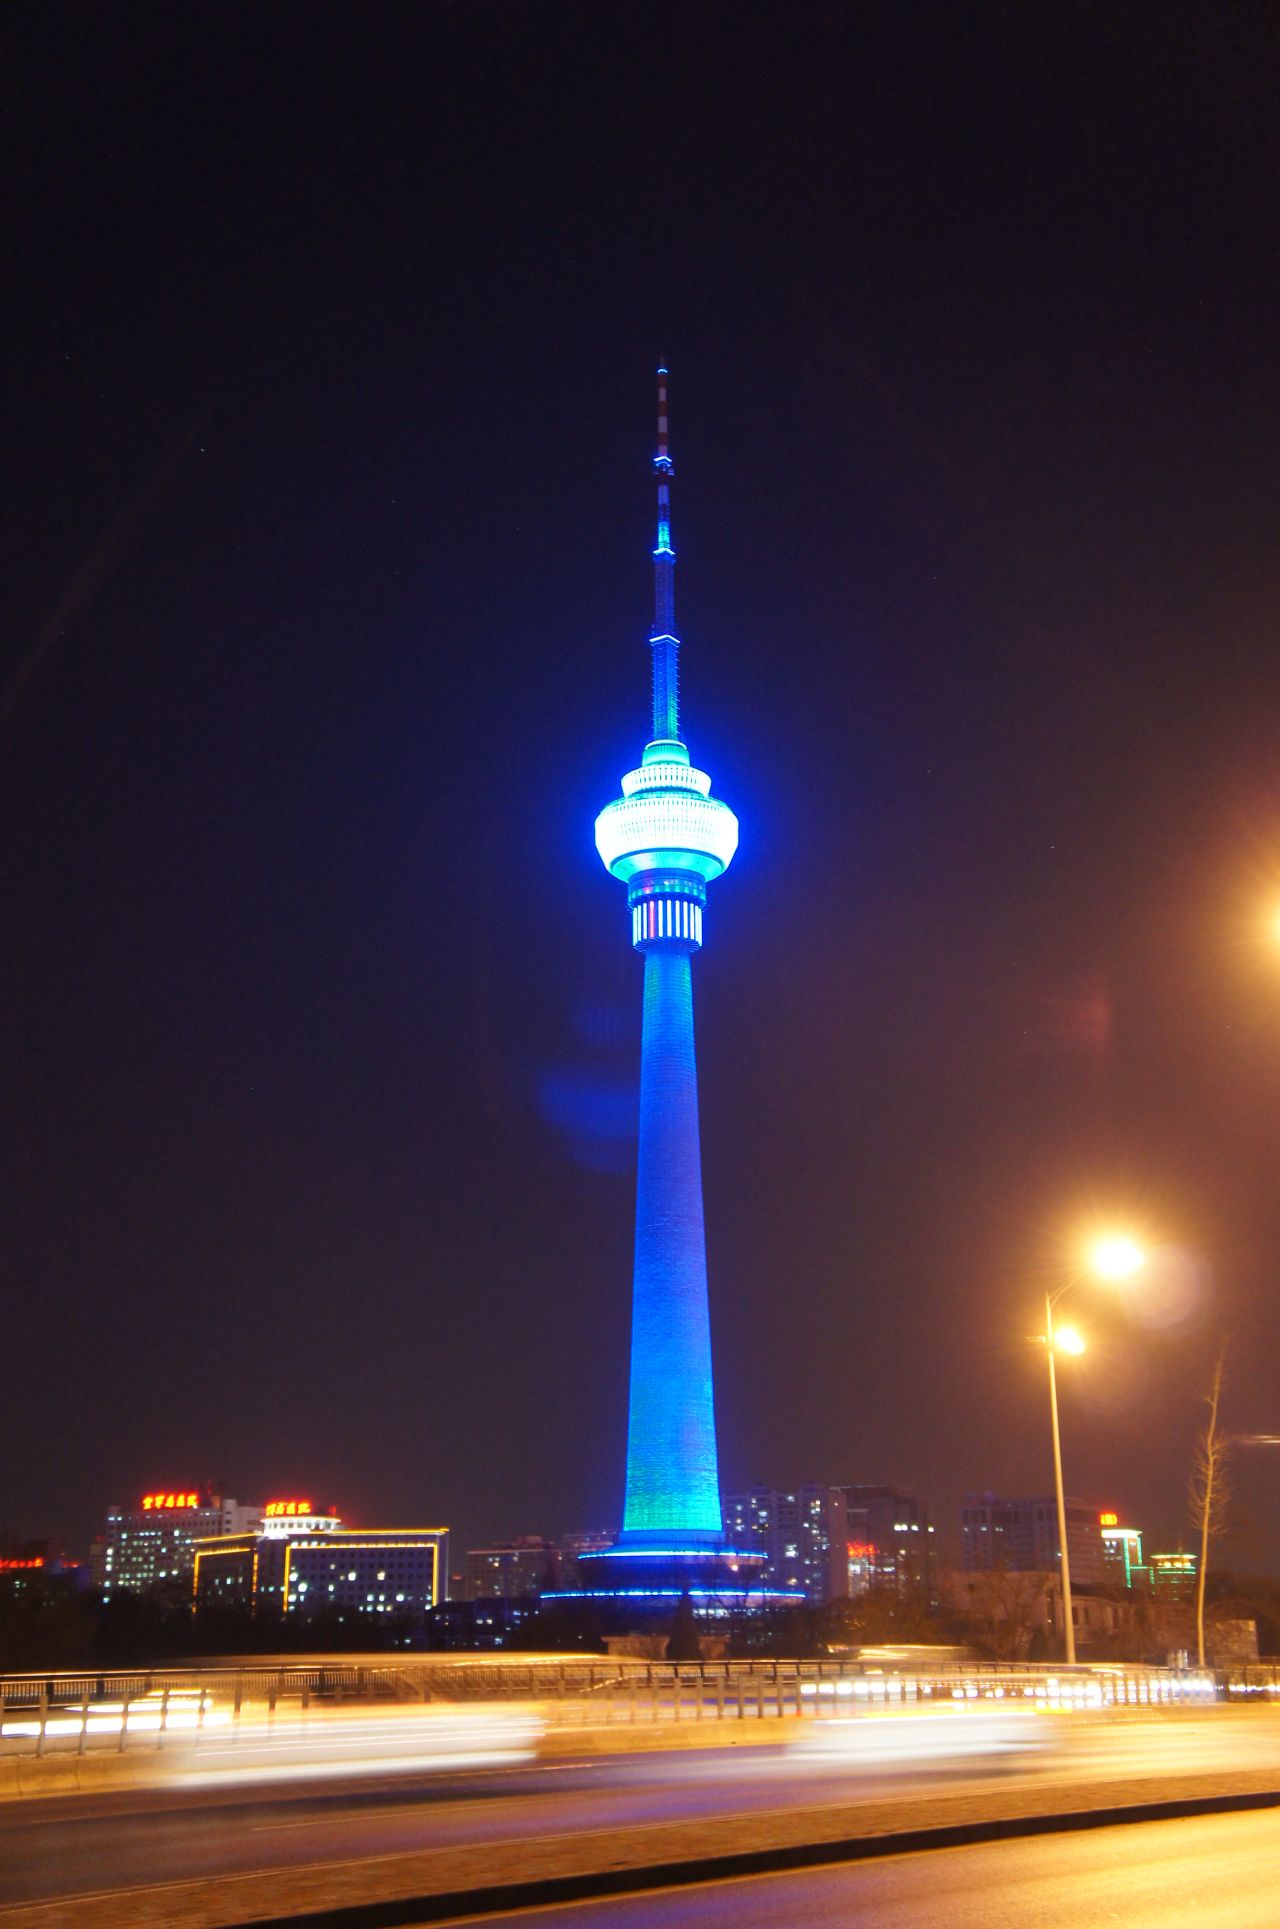 The China Central Radio & TV tower (CCRT) in Beijing lights up for the 2012 World Autism Awareness Day.